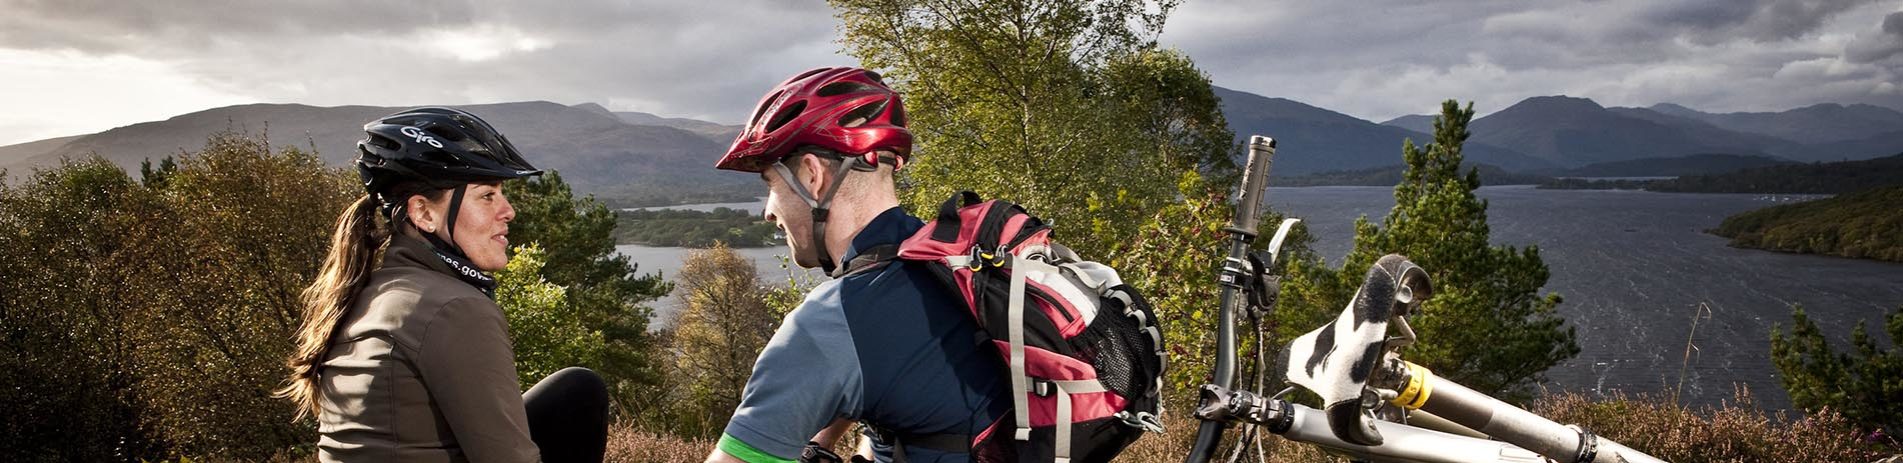 couple-wearing-helmets-with-bikes-chatting-with-loch-lomond-and-hills-in-the-distance